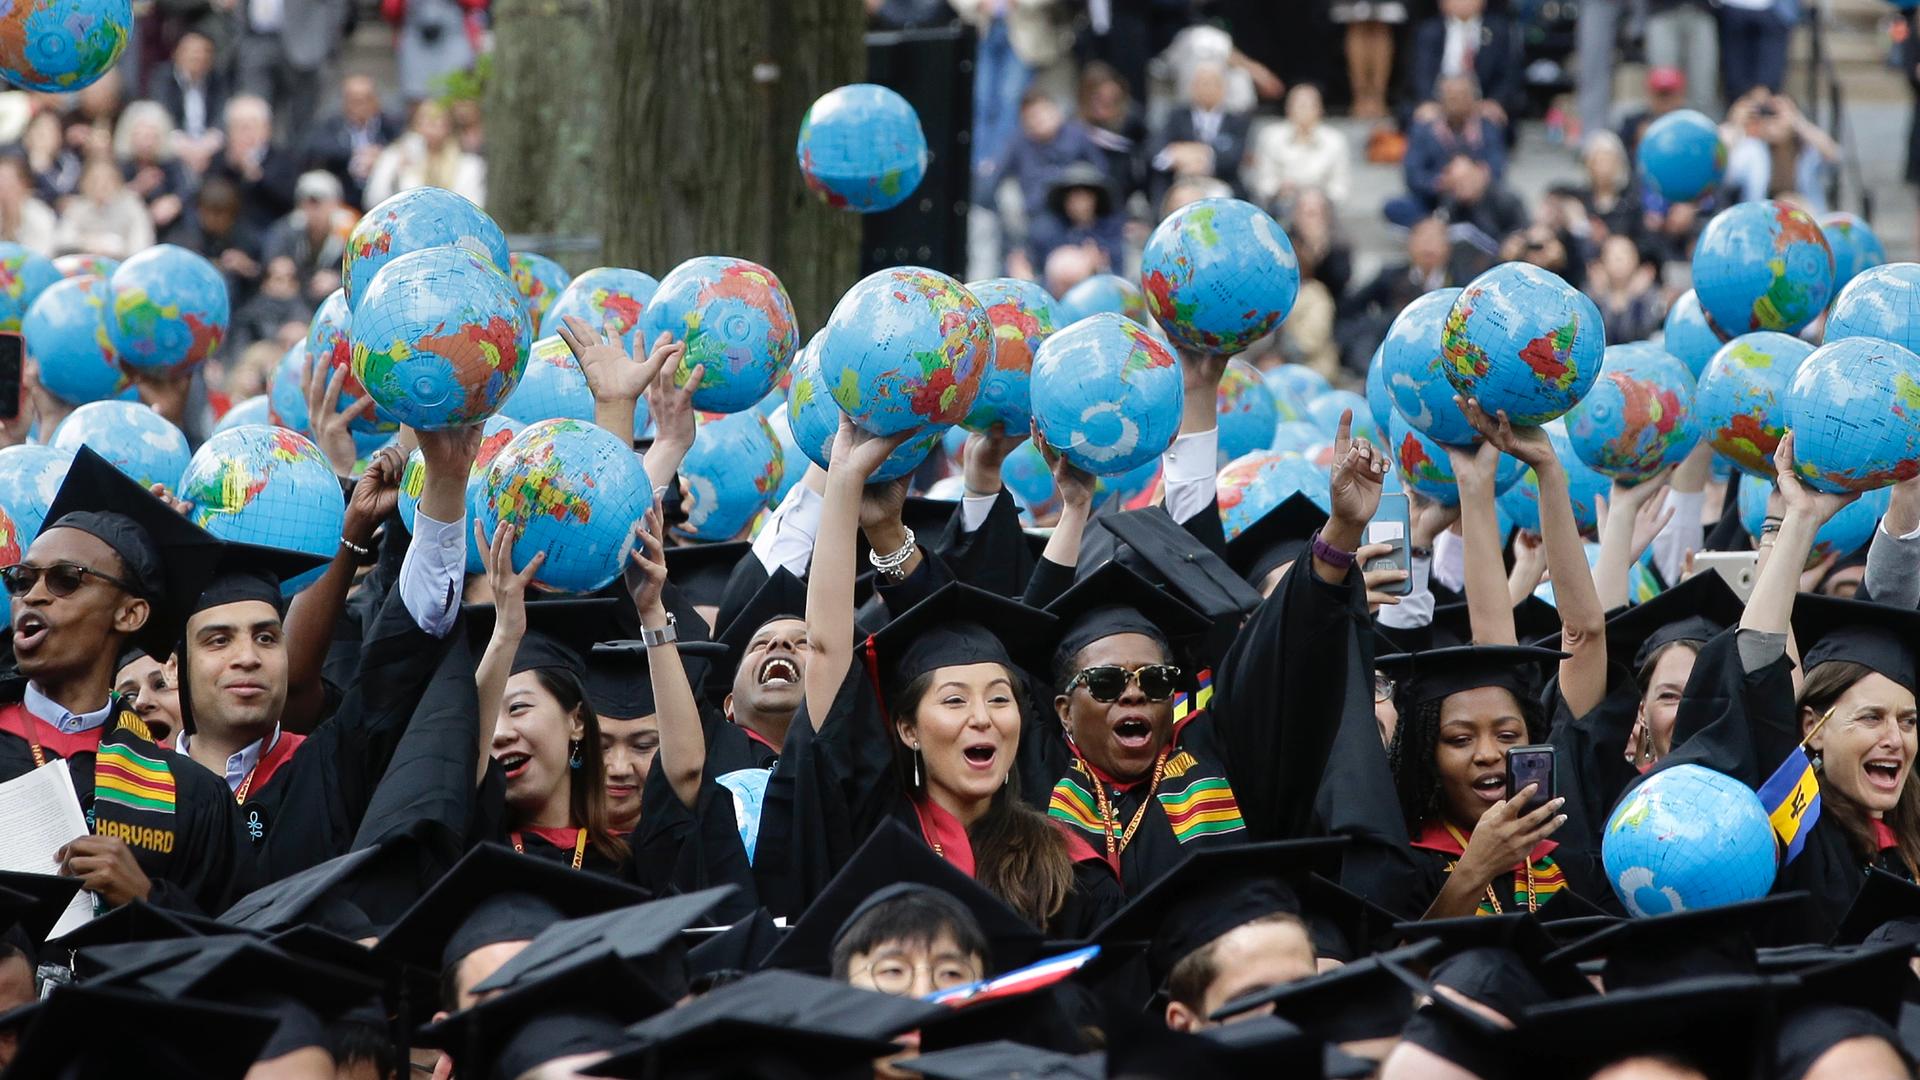 Students in black caps and gowns holding inflatable globes in the air